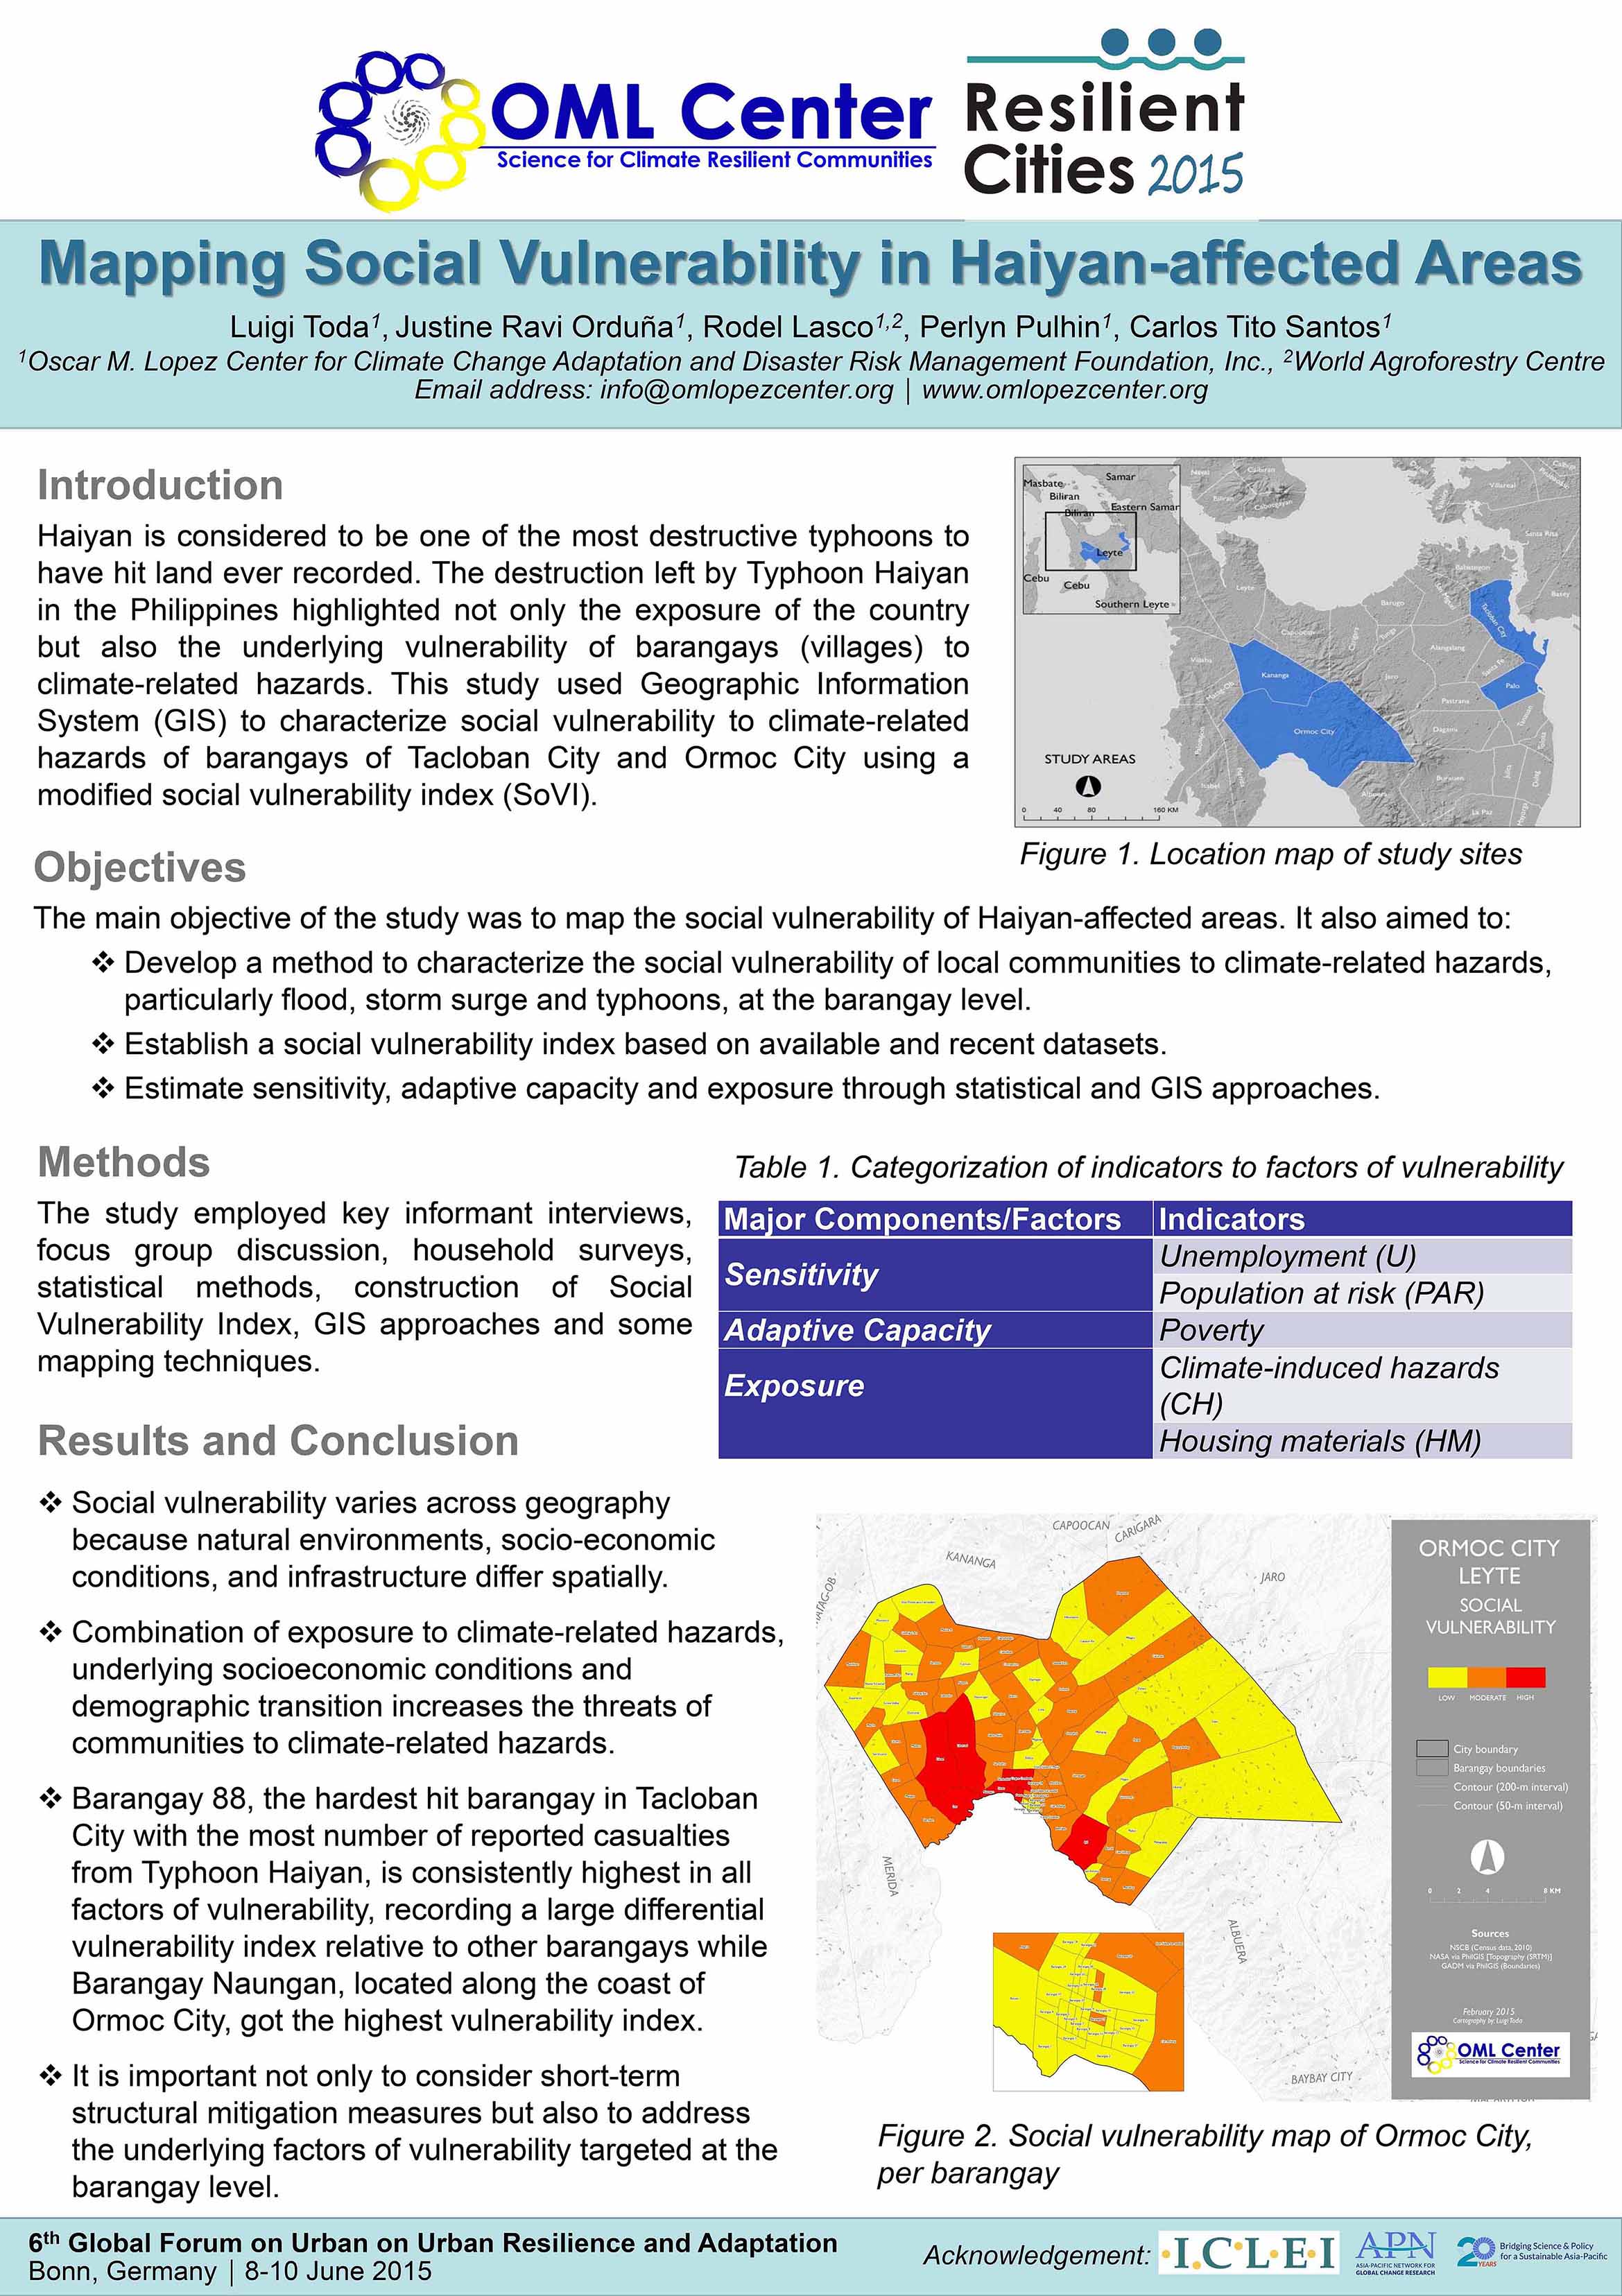 Mapping Social Vulnerability in Haiyan-affected Areas